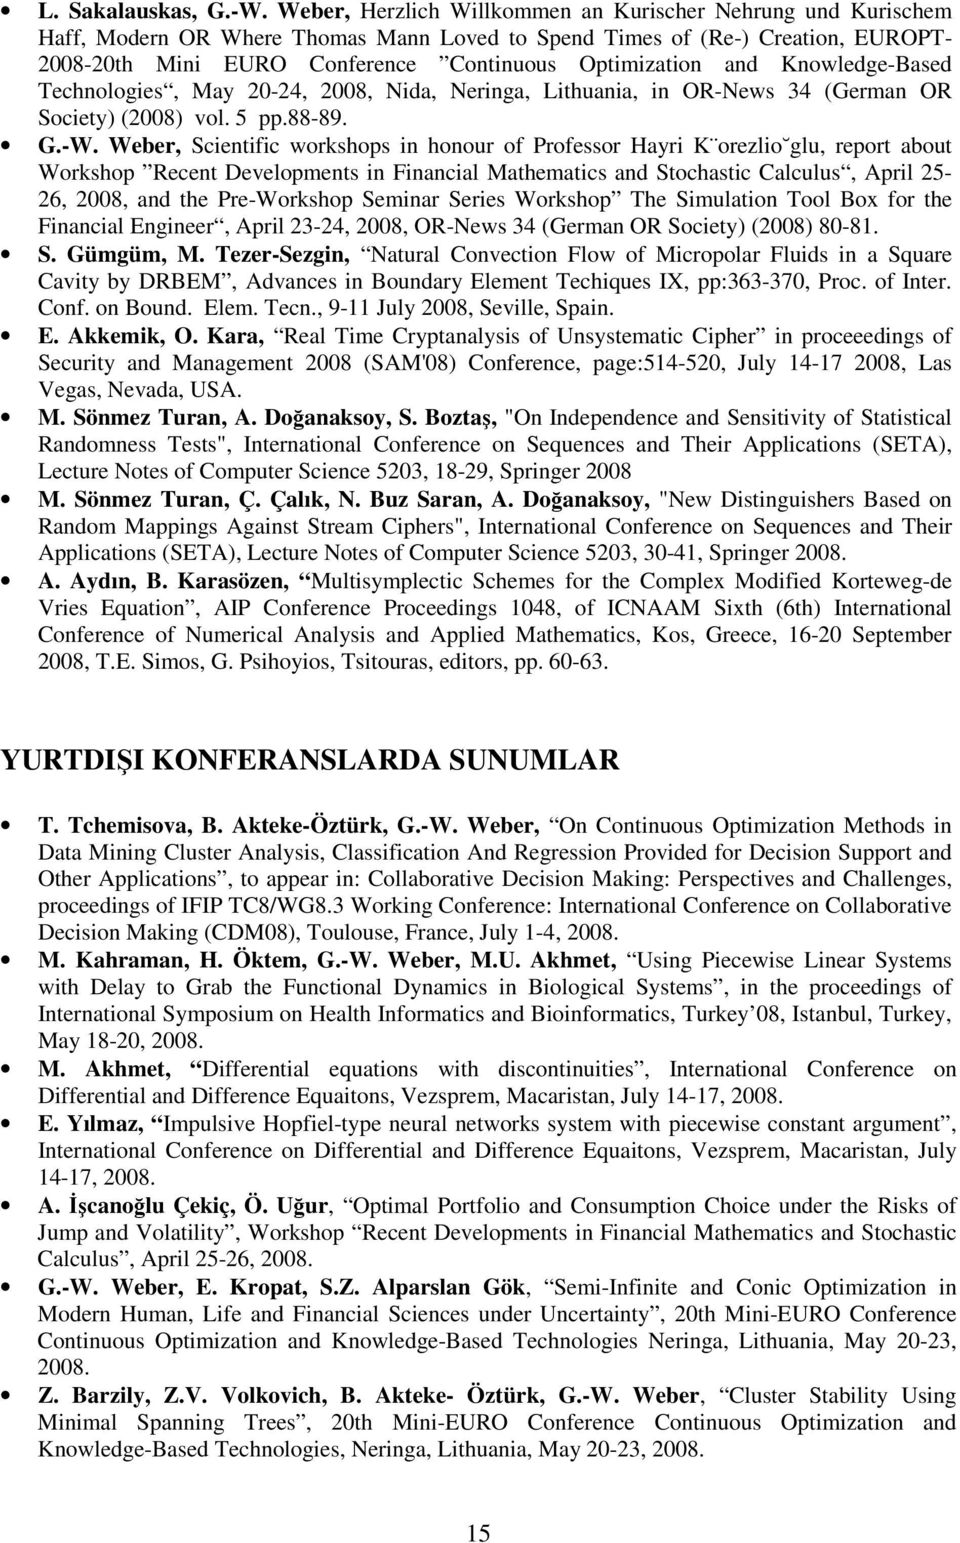 and Knowledge-Based Technologies, May 20-24, 2008, Nida, Neringa, Lithuania, in OR-News 34 (German OR Society) (2008) vol. 5 pp.88-89. G.-W.